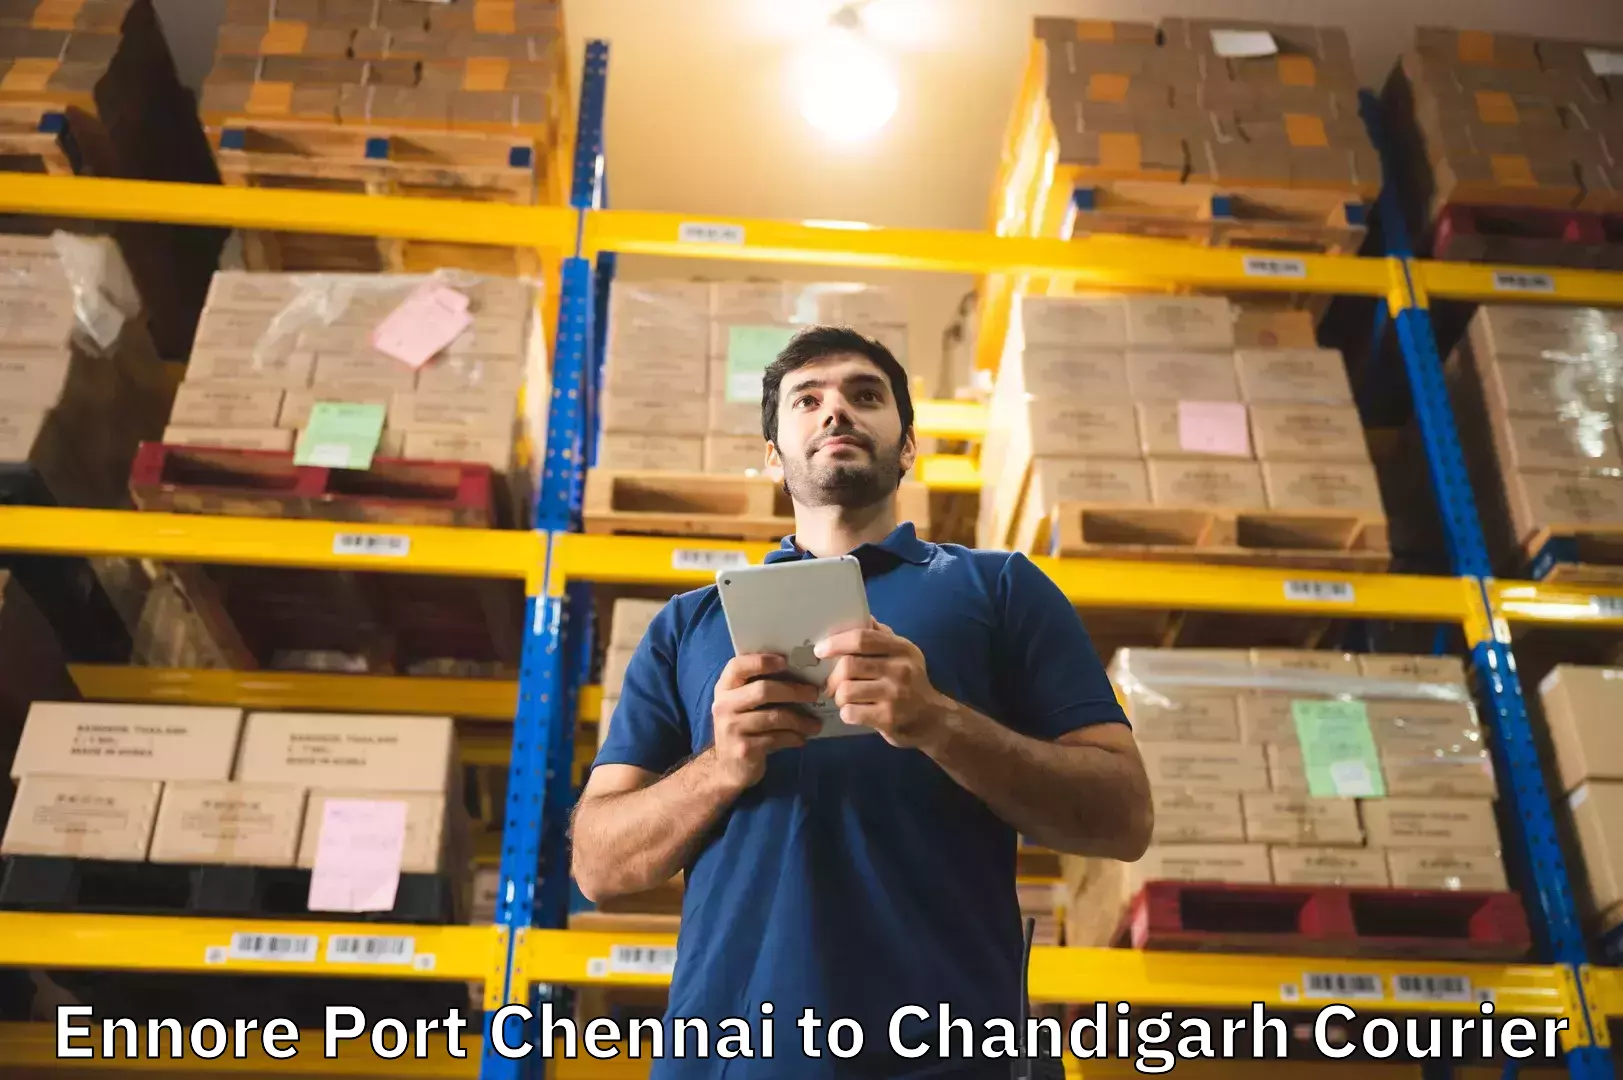 Single item baggage courier Ennore Port Chennai to Chandigarh